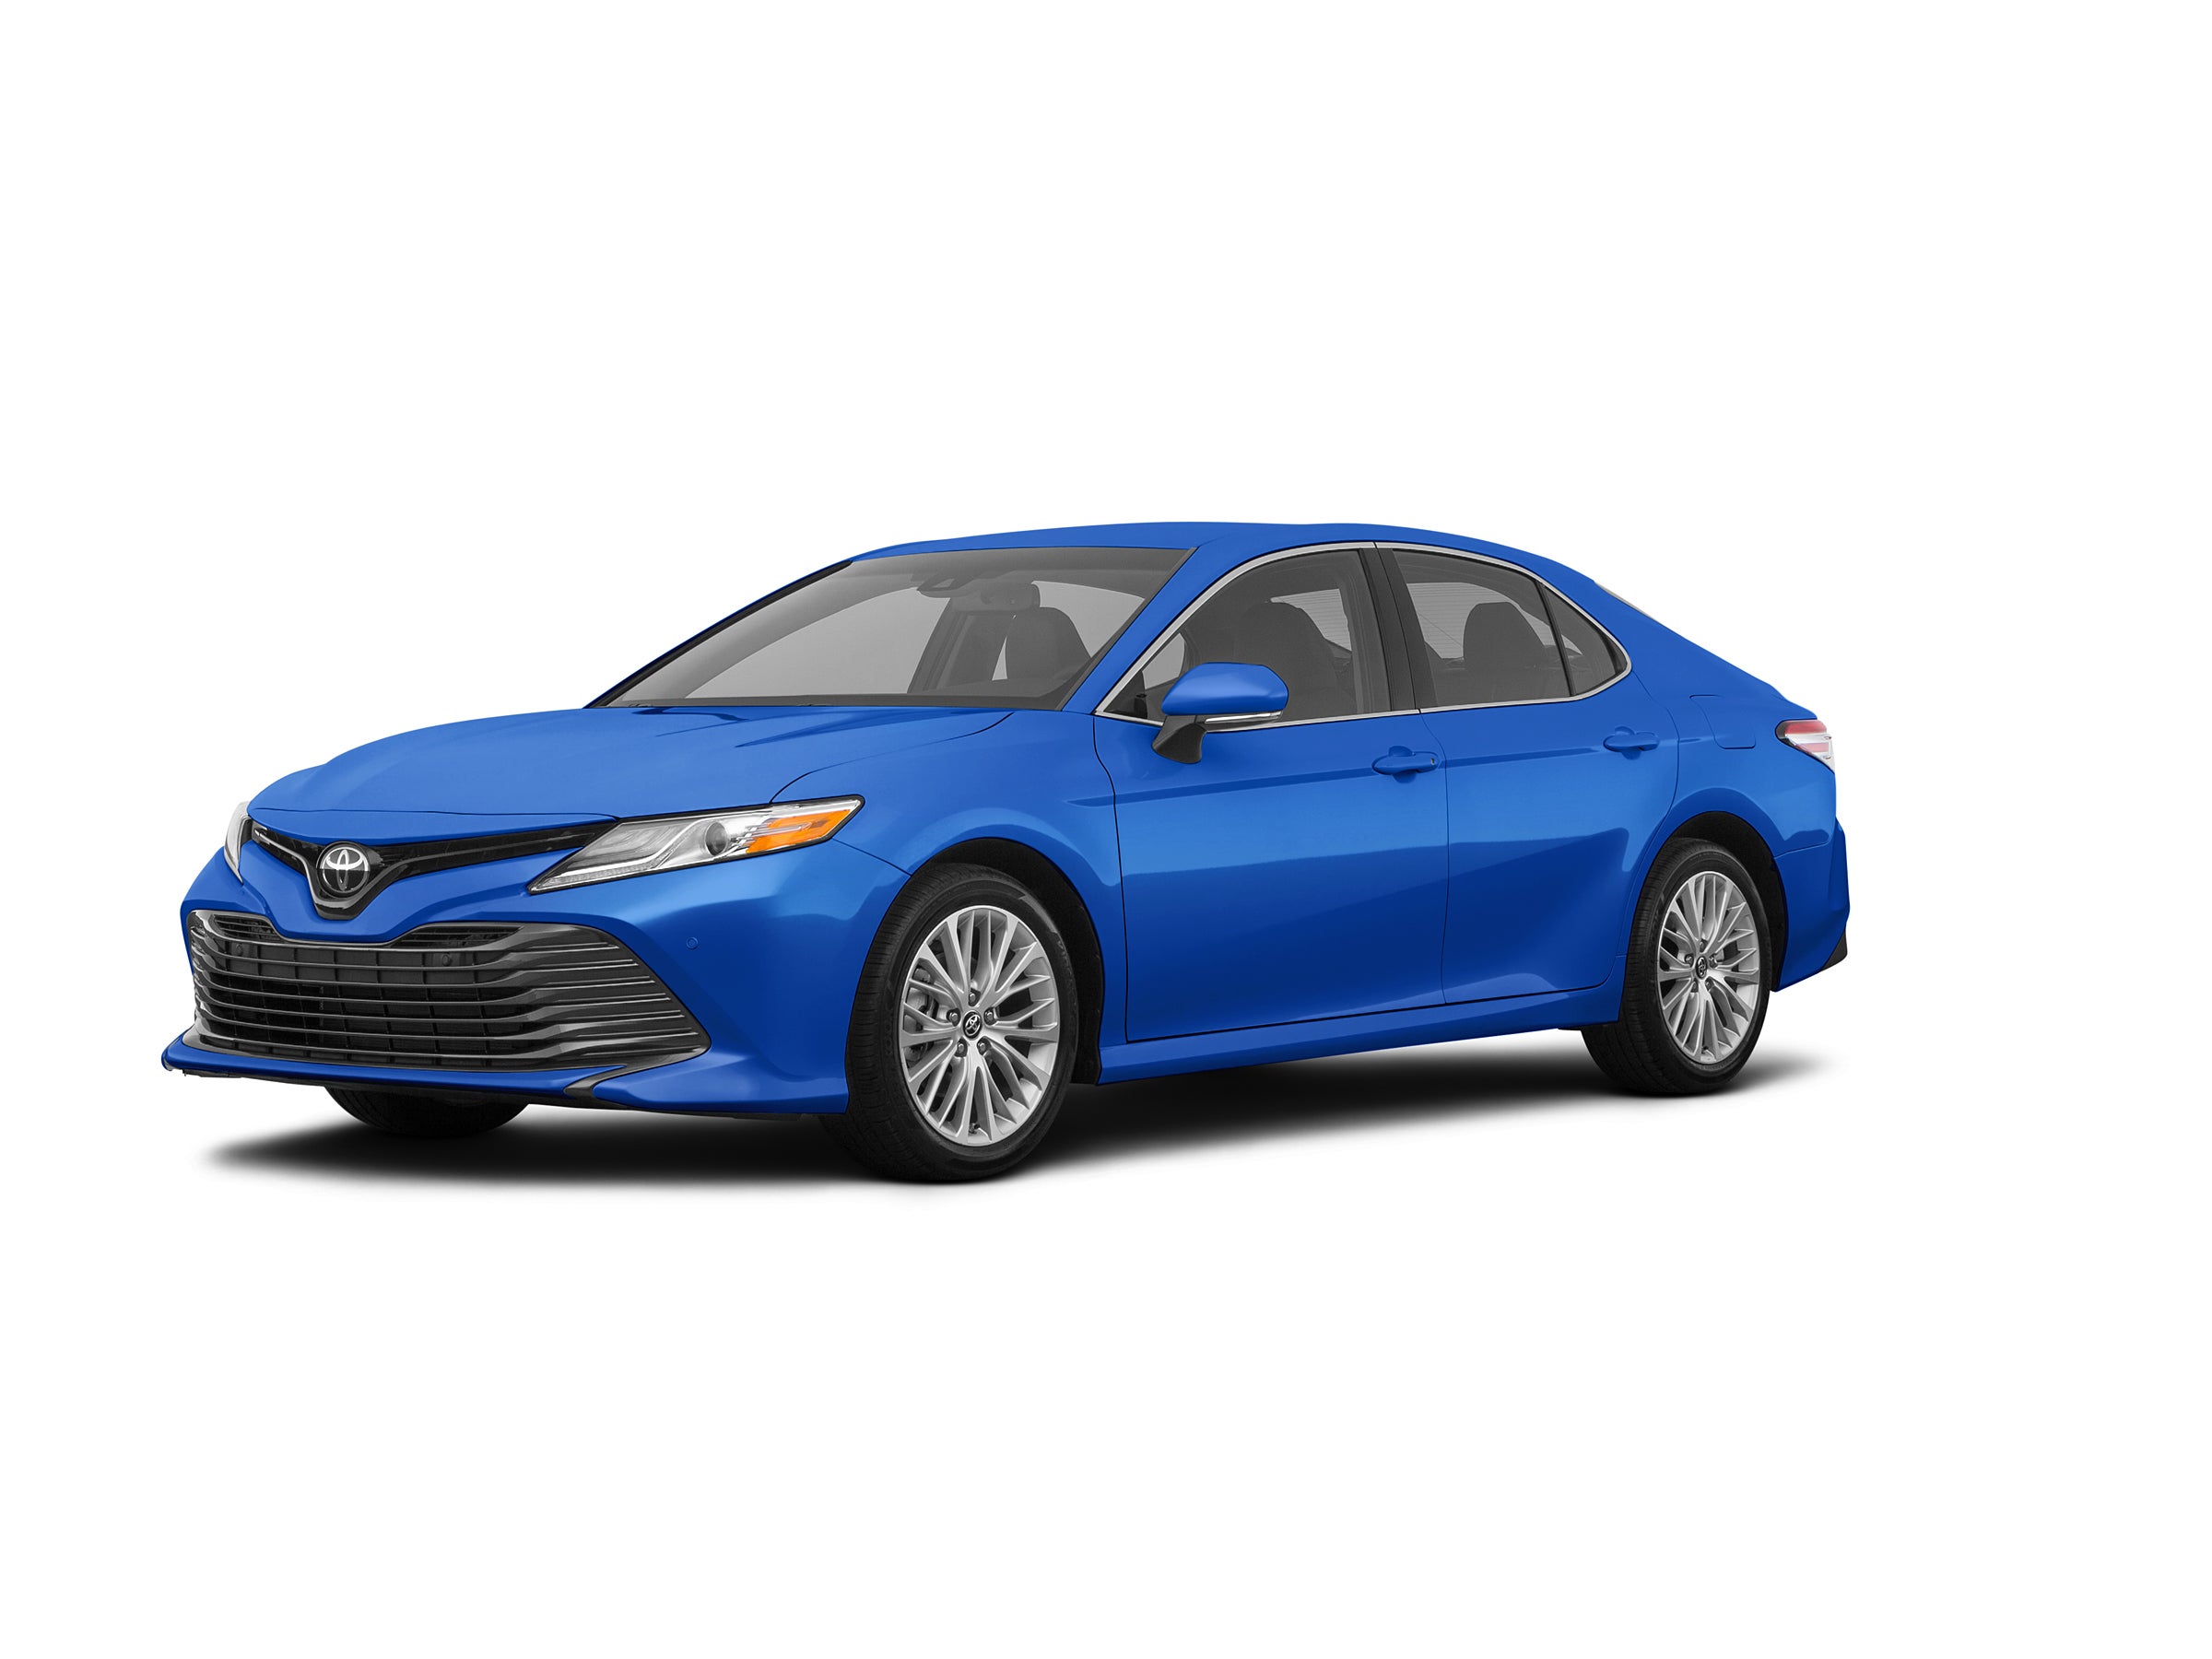 2018 Toyota Camry 2.5 Liter XLE model provides more power, One of the best used vehicles.